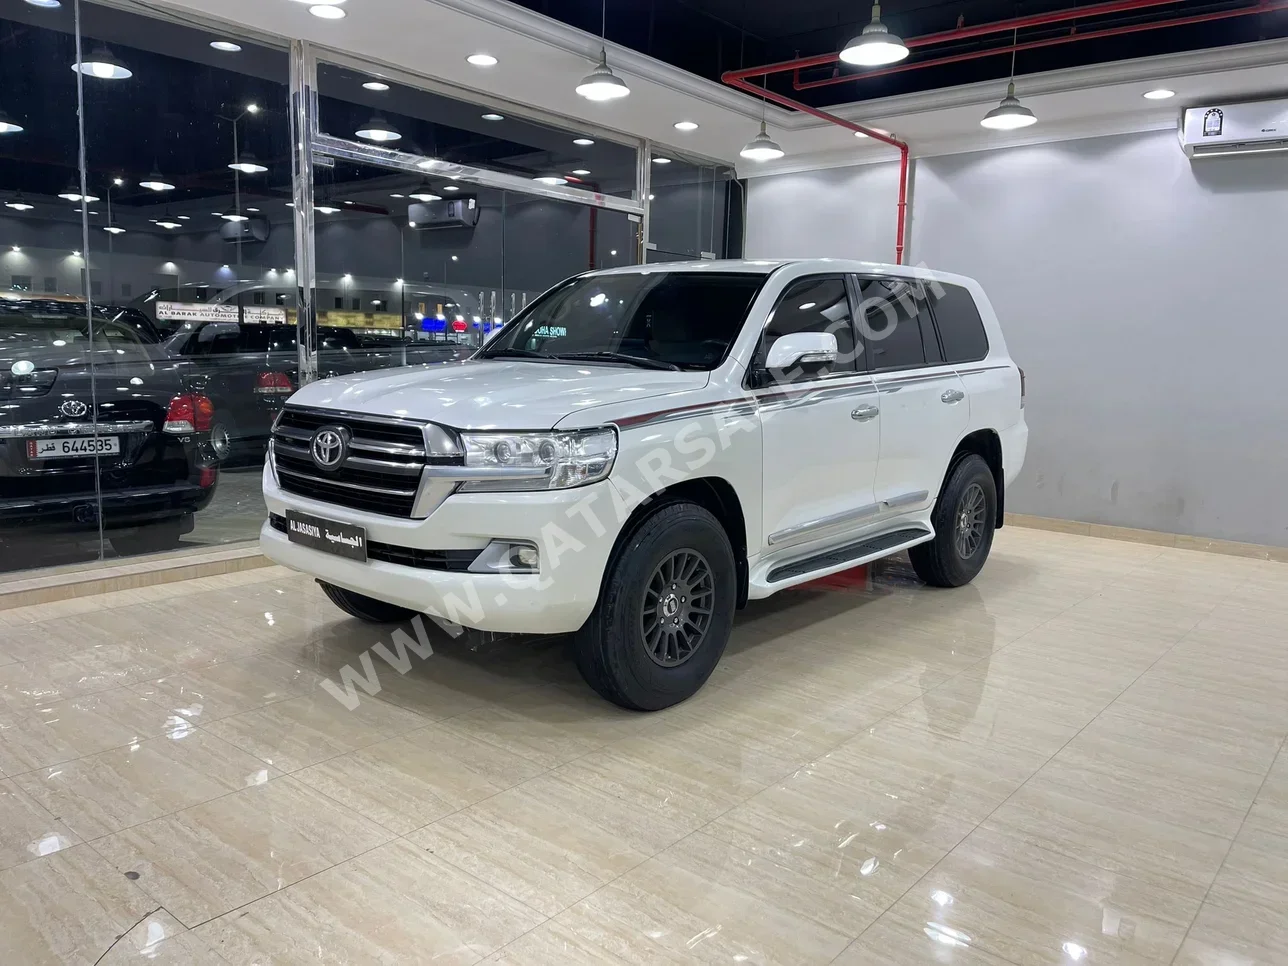 Toyota  Land Cruiser  G  2017  Automatic  244,000 Km  6 Cylinder  Four Wheel Drive (4WD)  SUV  White